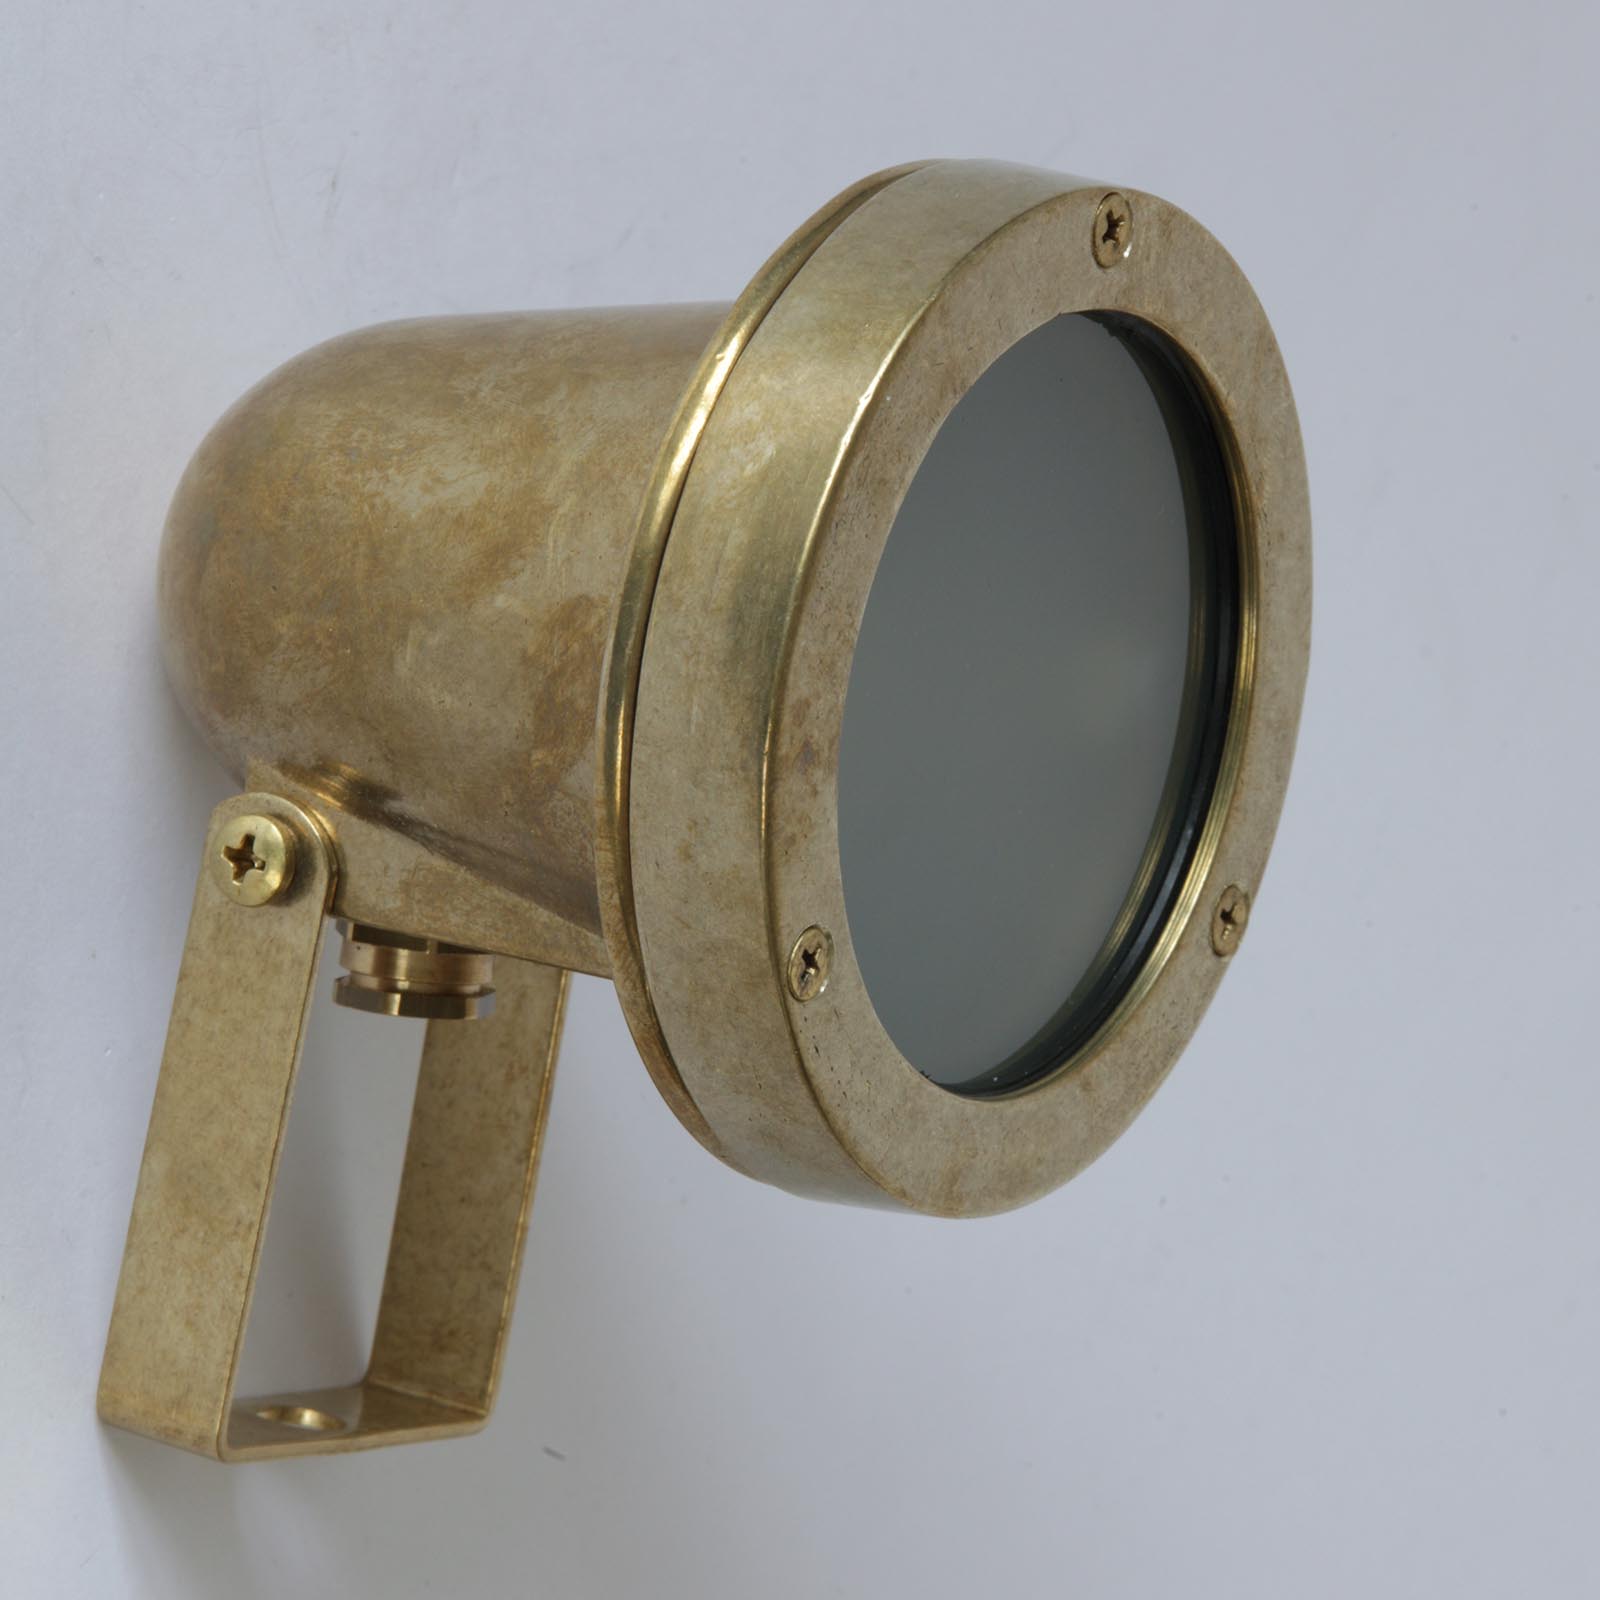 Outdoors brass spot N° 97 for the ceiling, floor or wall: Abgebildet in Messing roh